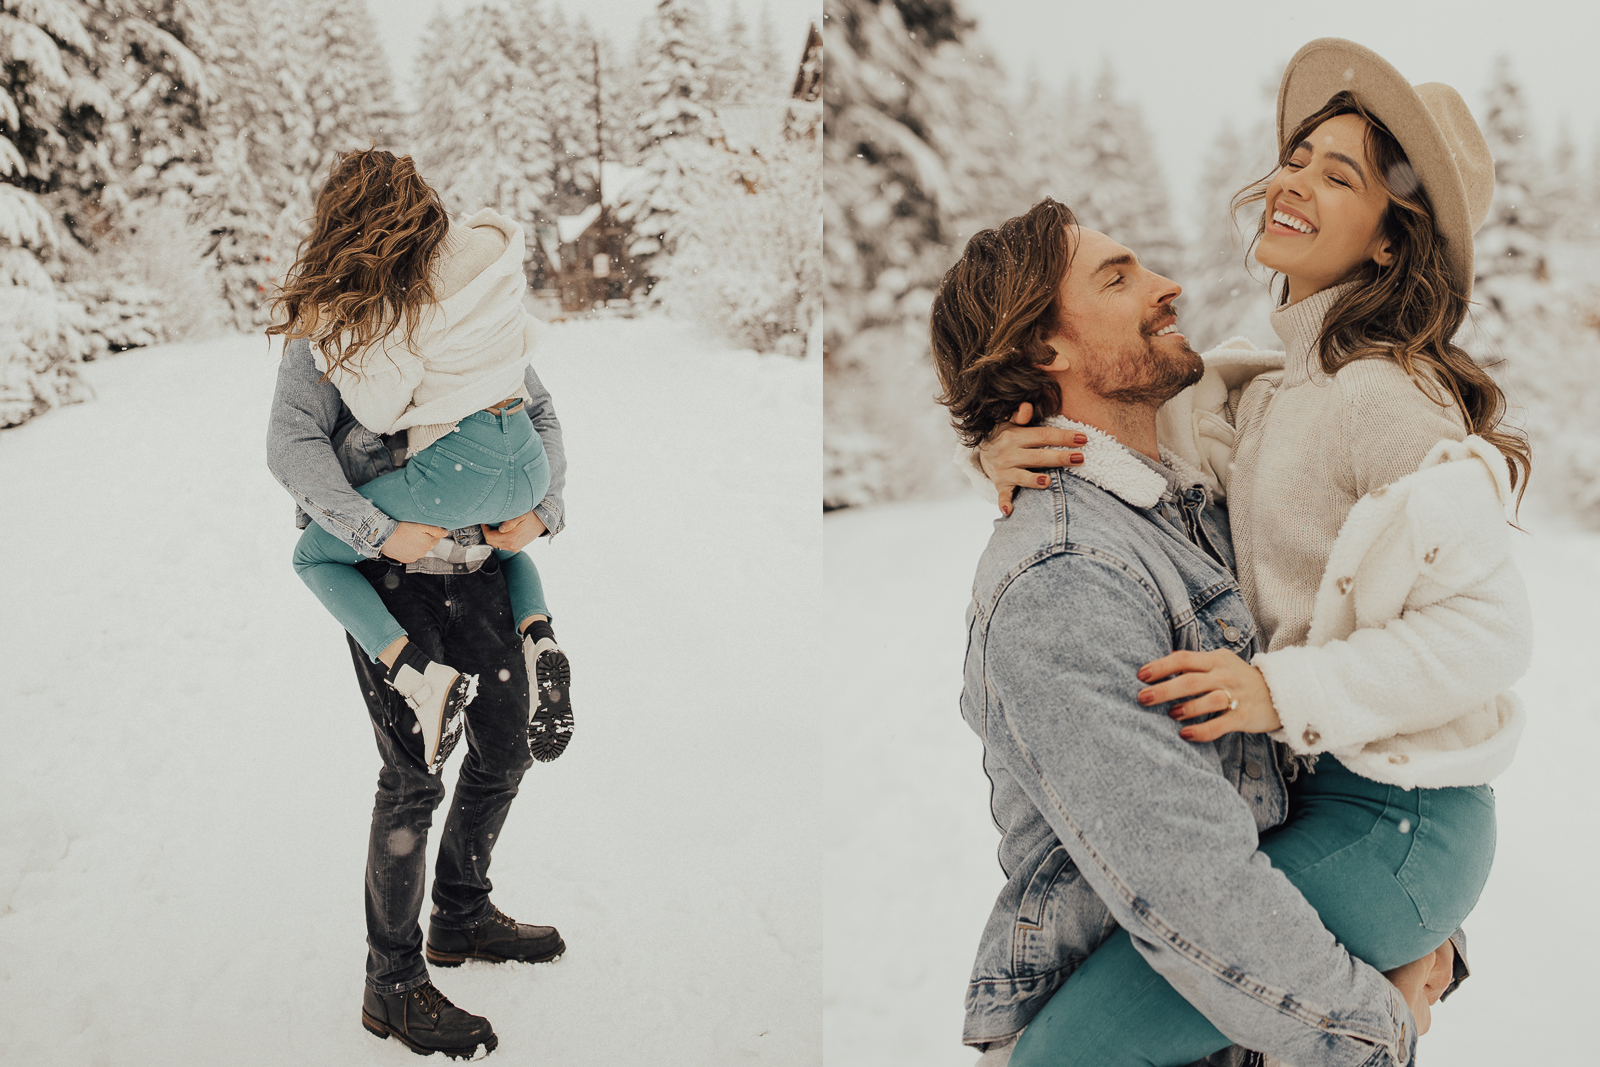 25 Snowy Engagement Photos to Inspire Your Own